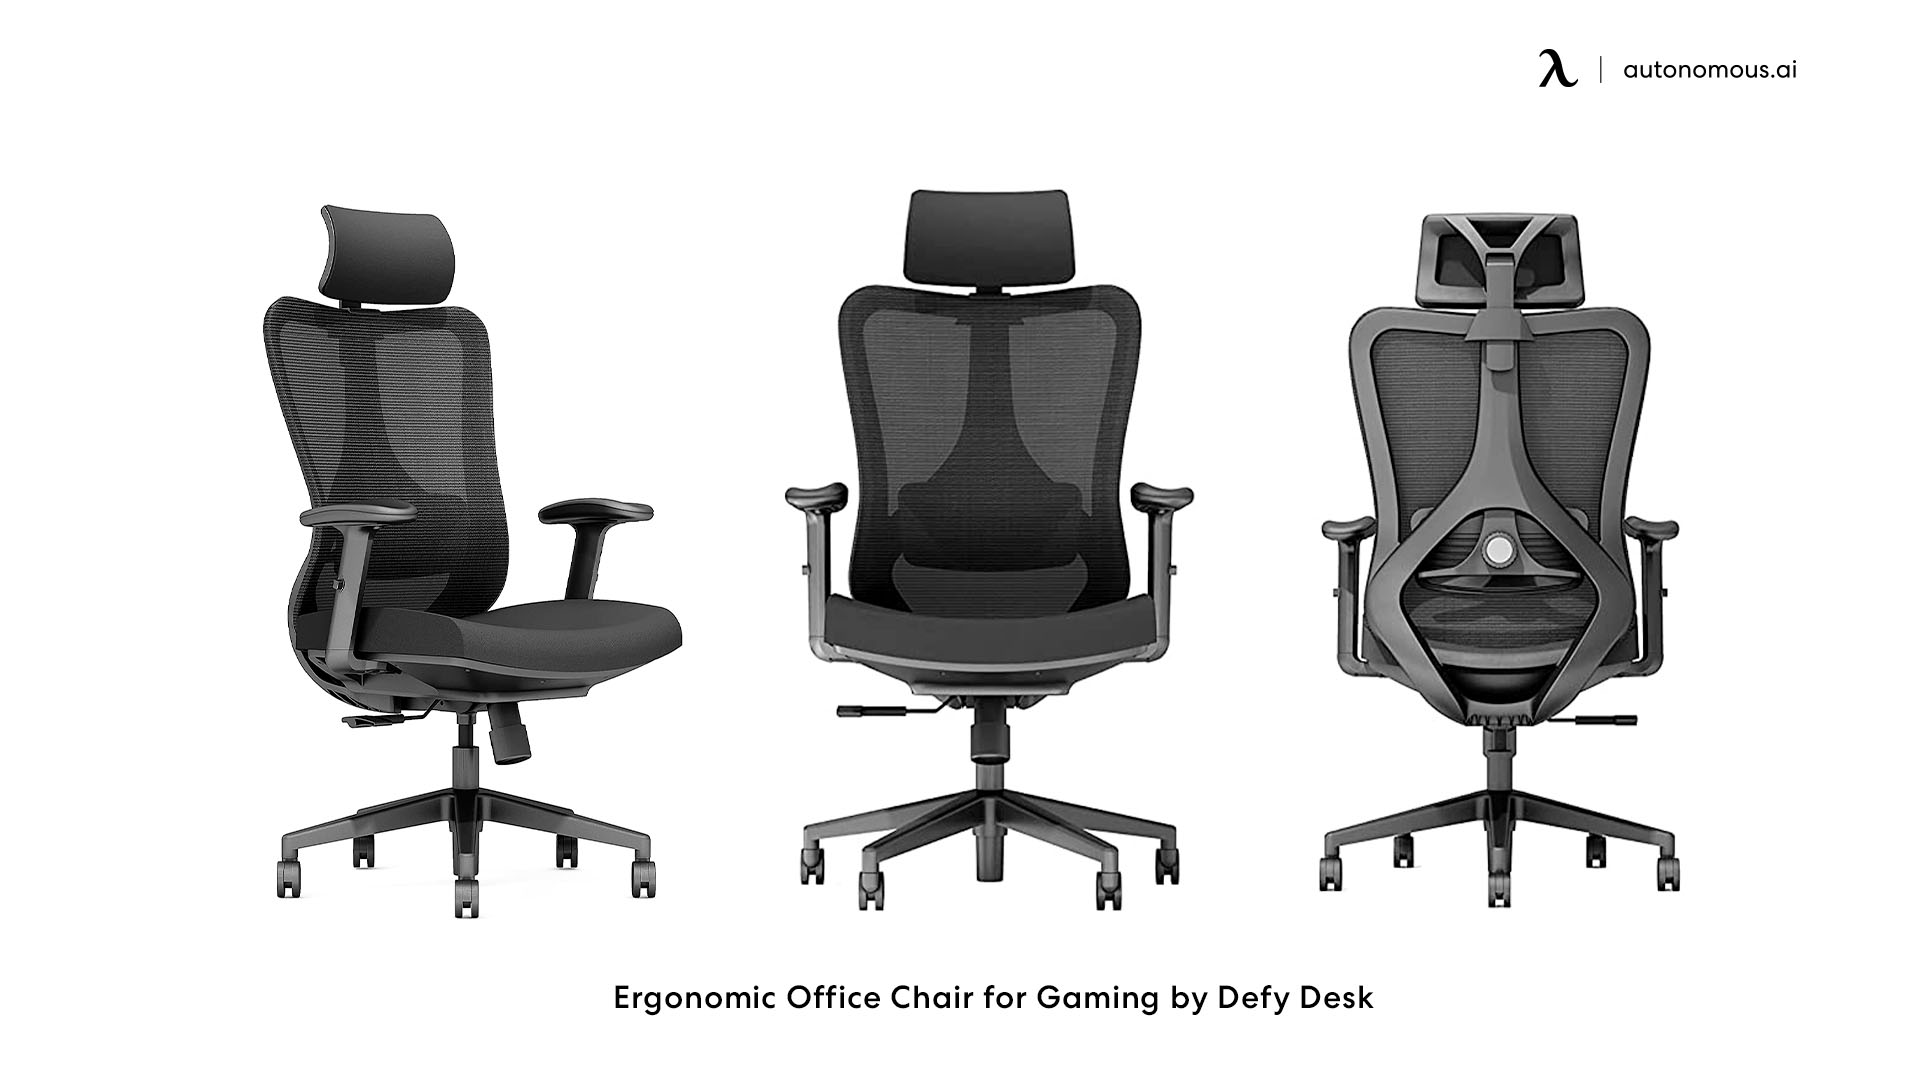 Ergonomic Office Chair for Gaming by Defy Desk